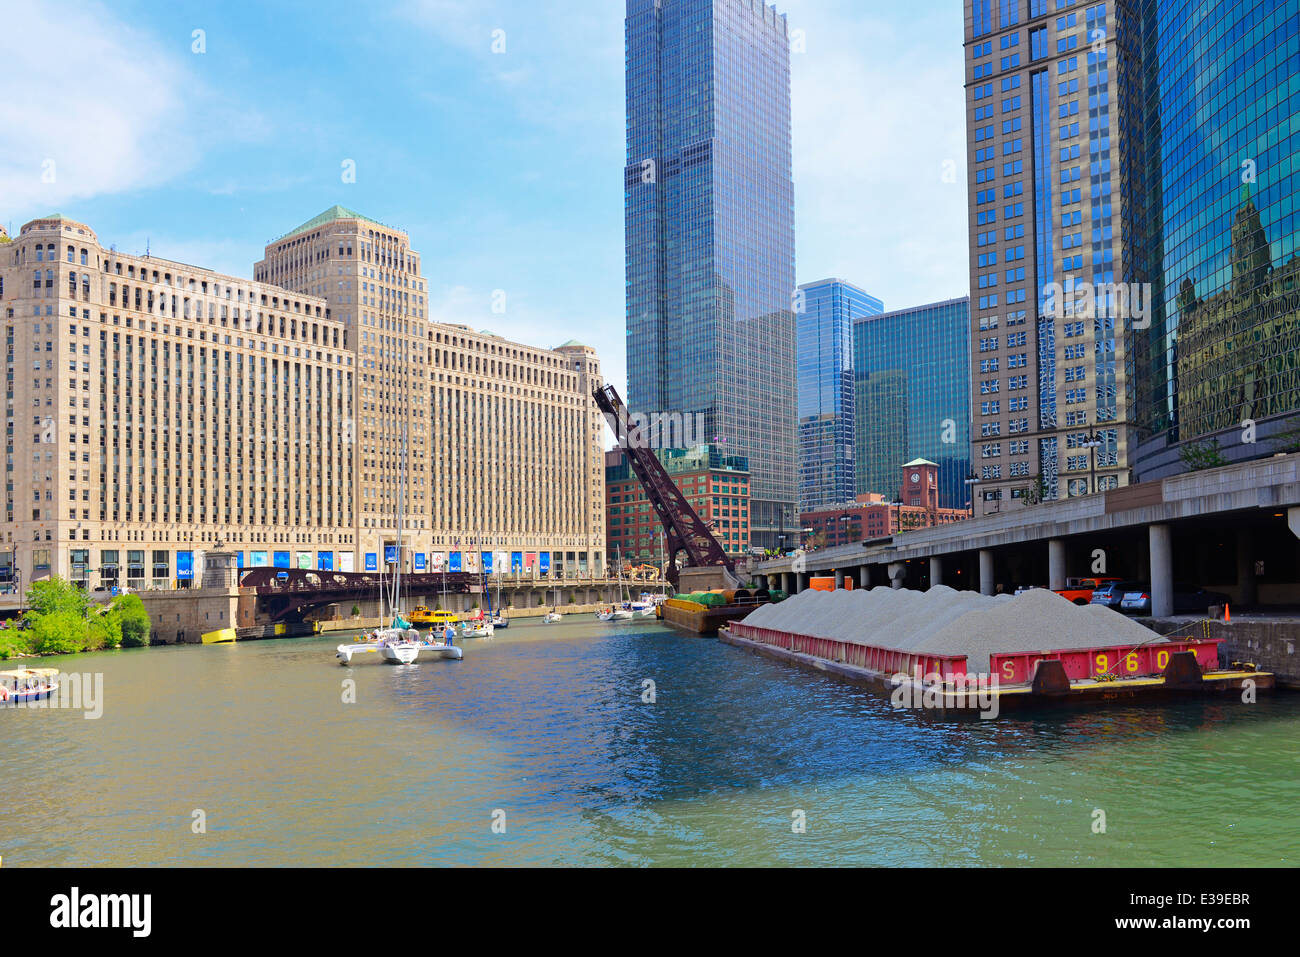 Chicago River, view of Merchandise Mart Building and Franklin Street Bridge, North Side of Chicago, Illinois Stock Photo